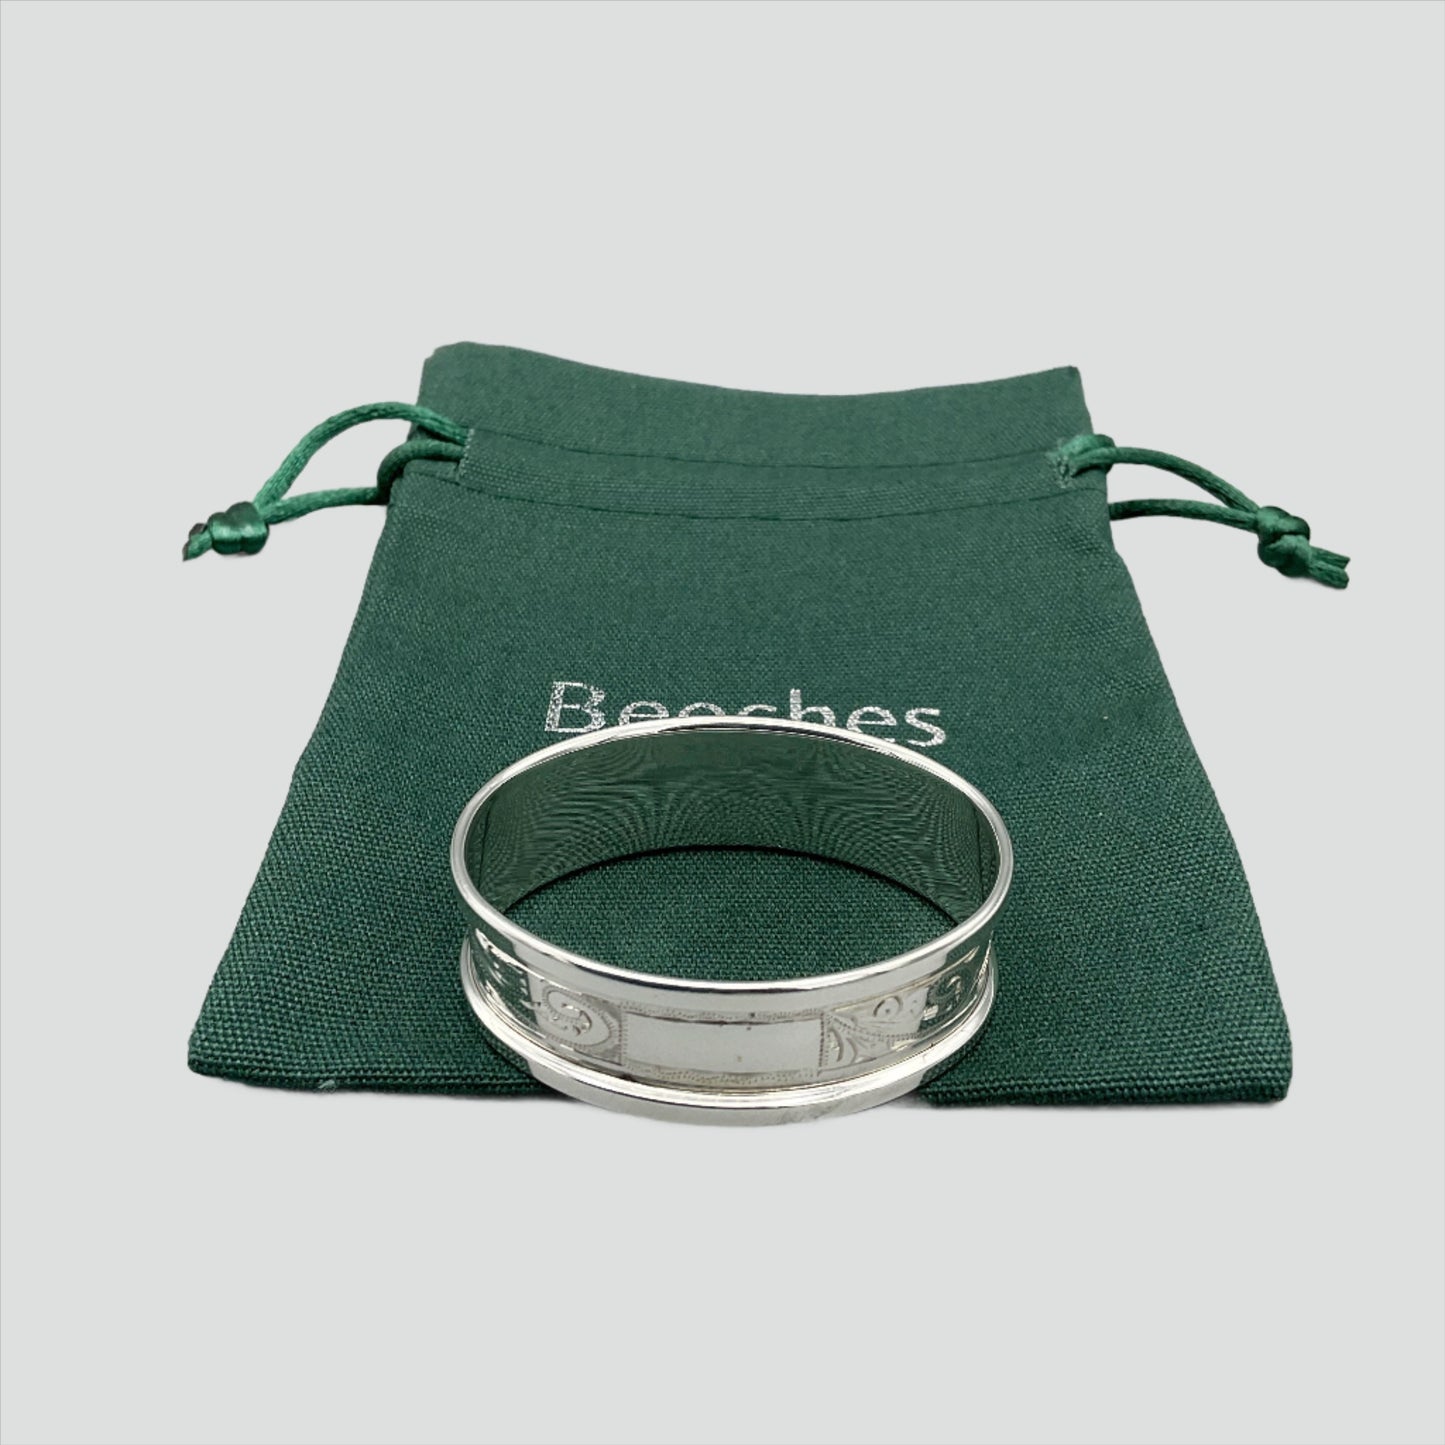 Engraved silver napkin ring sitting on a green cotton bag